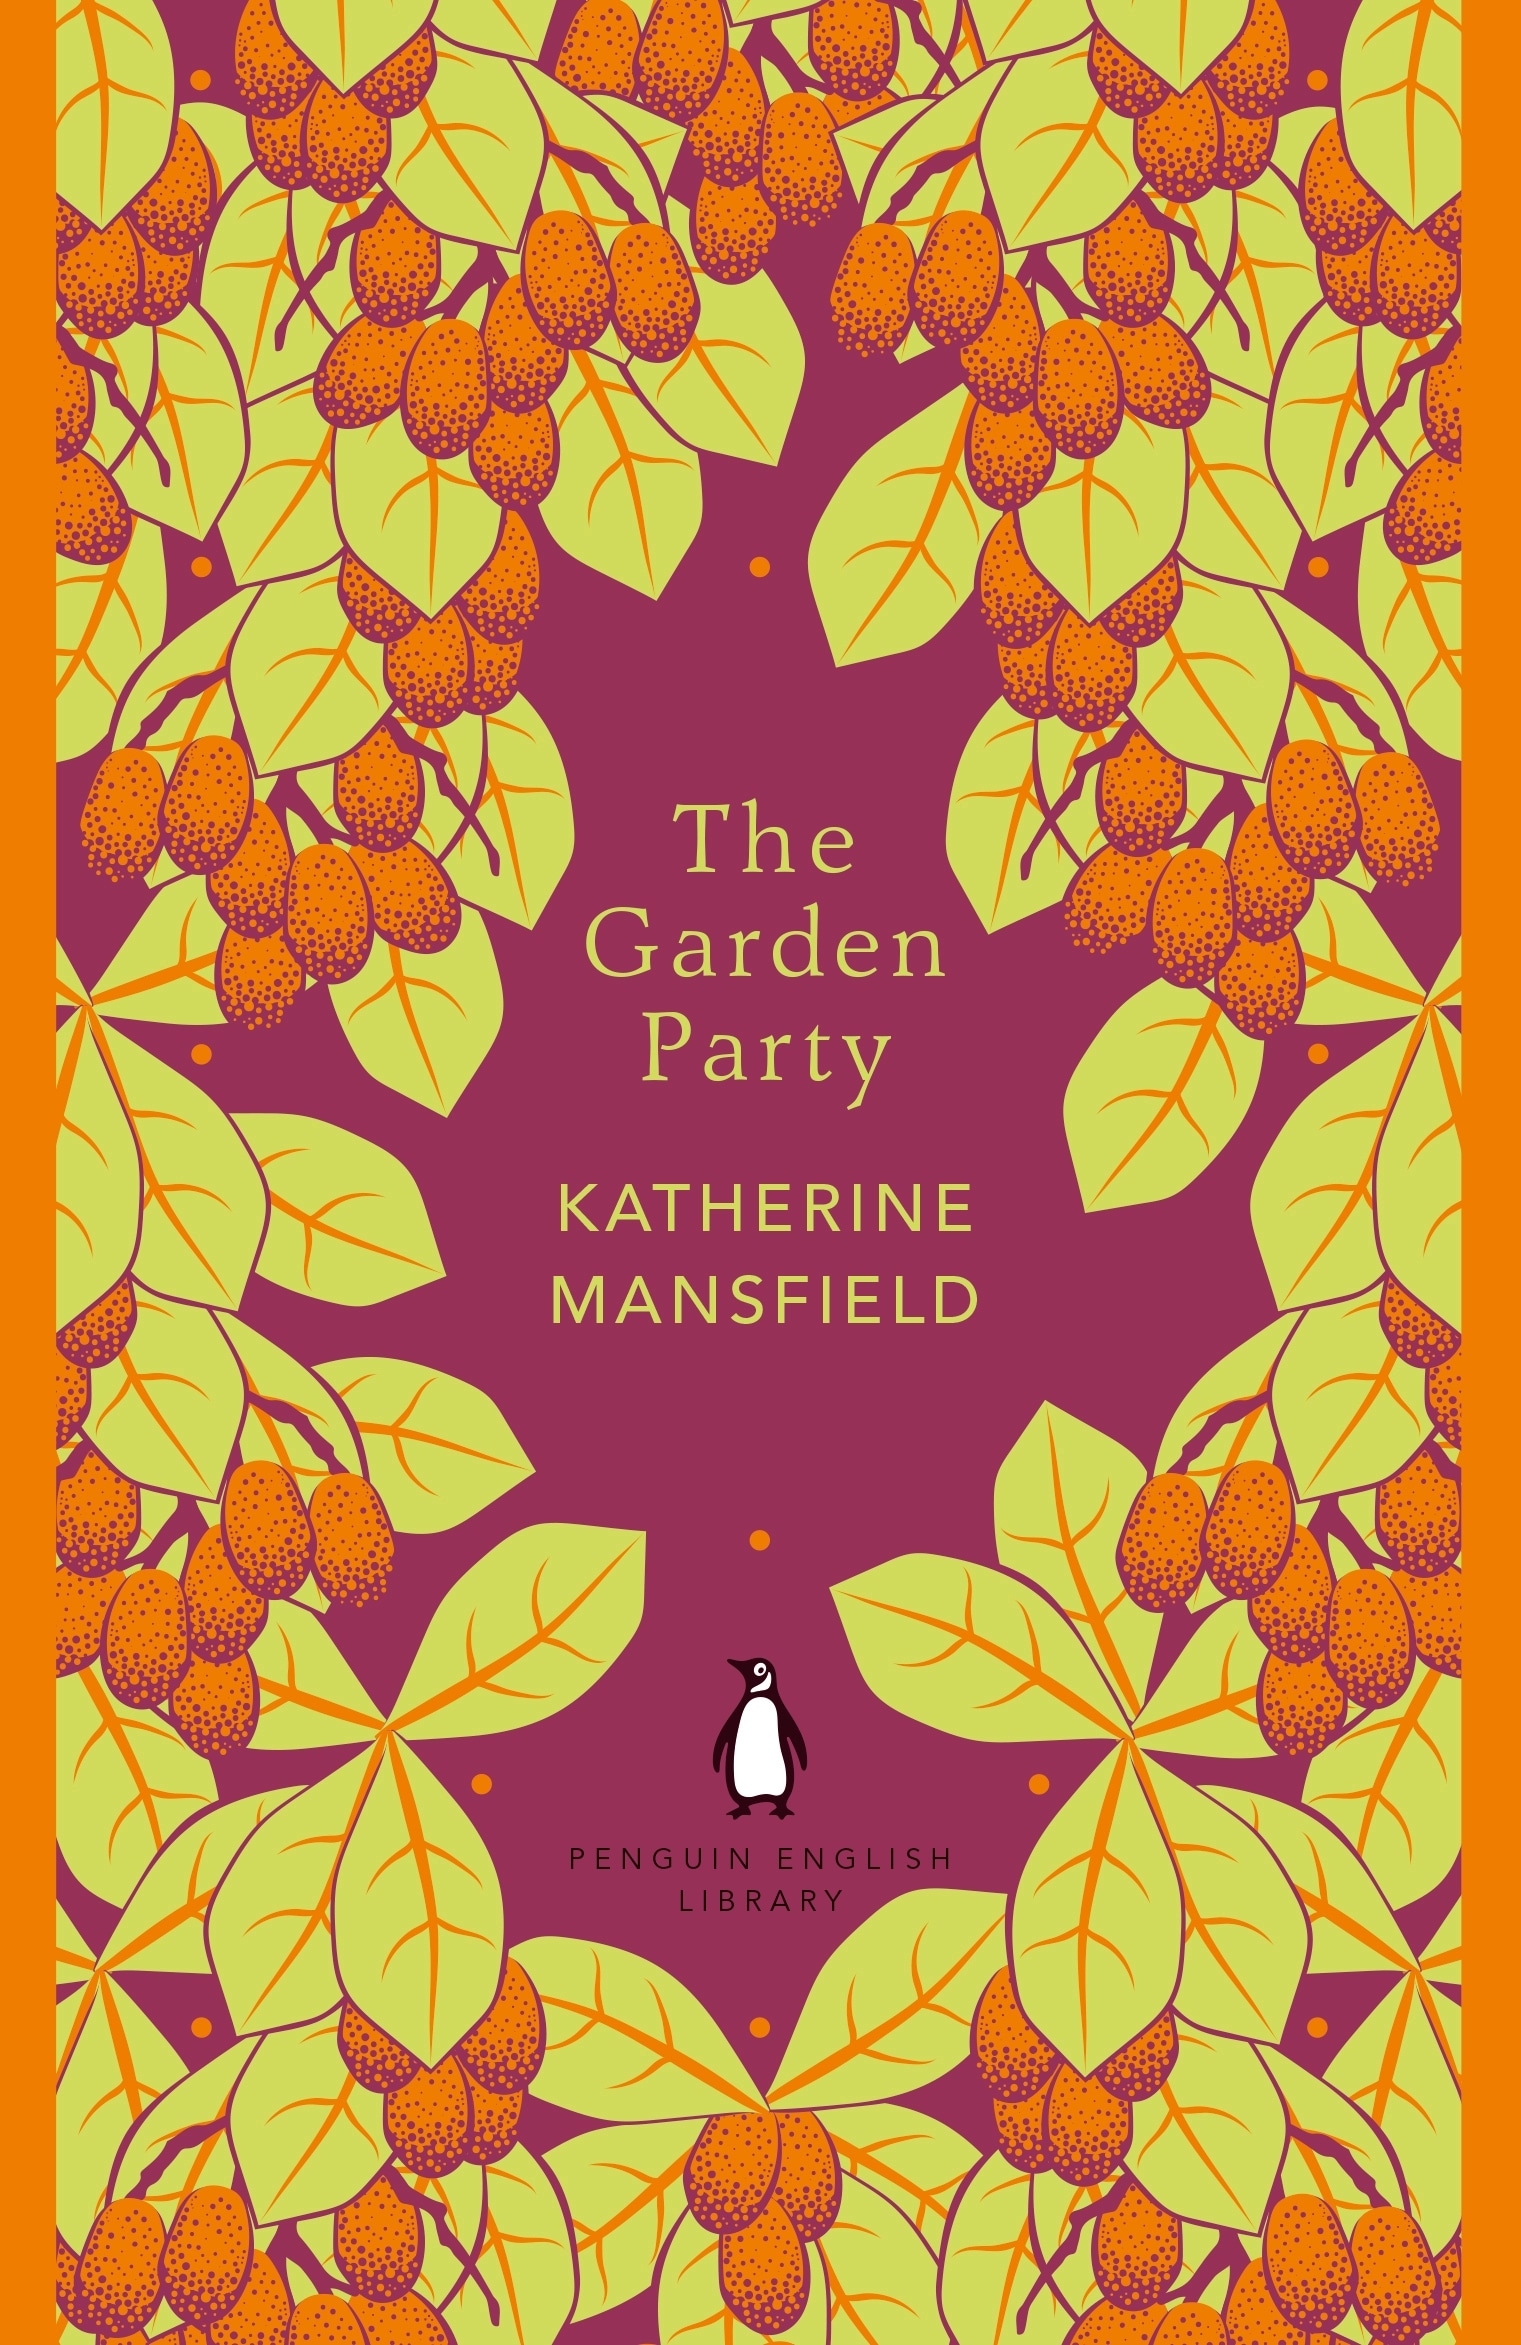 Book “The Garden Party” by Katherine Mansfield — June 7, 2018